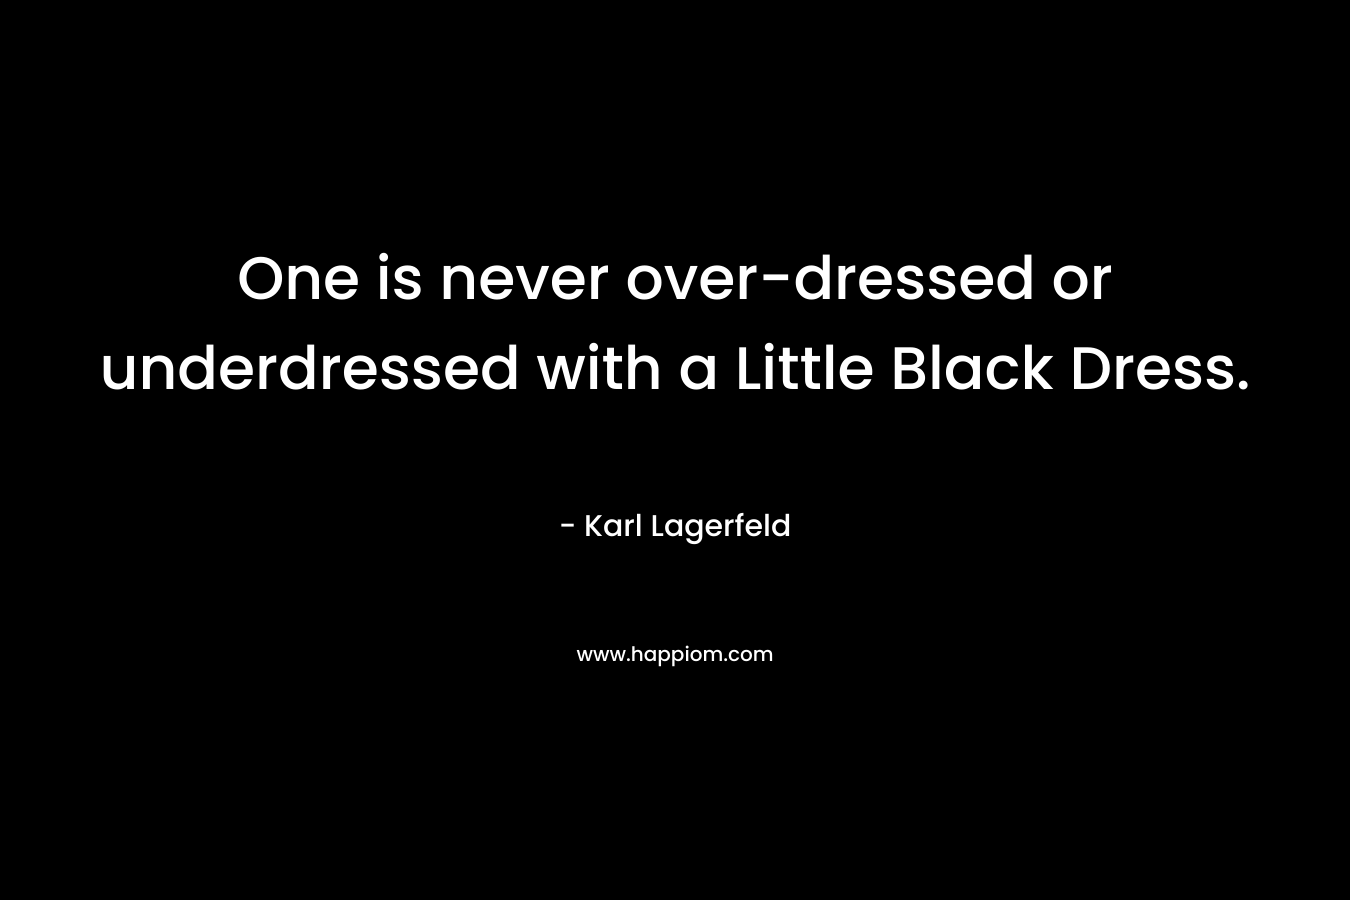 One is never over-dressed or underdressed with a Little Black Dress.